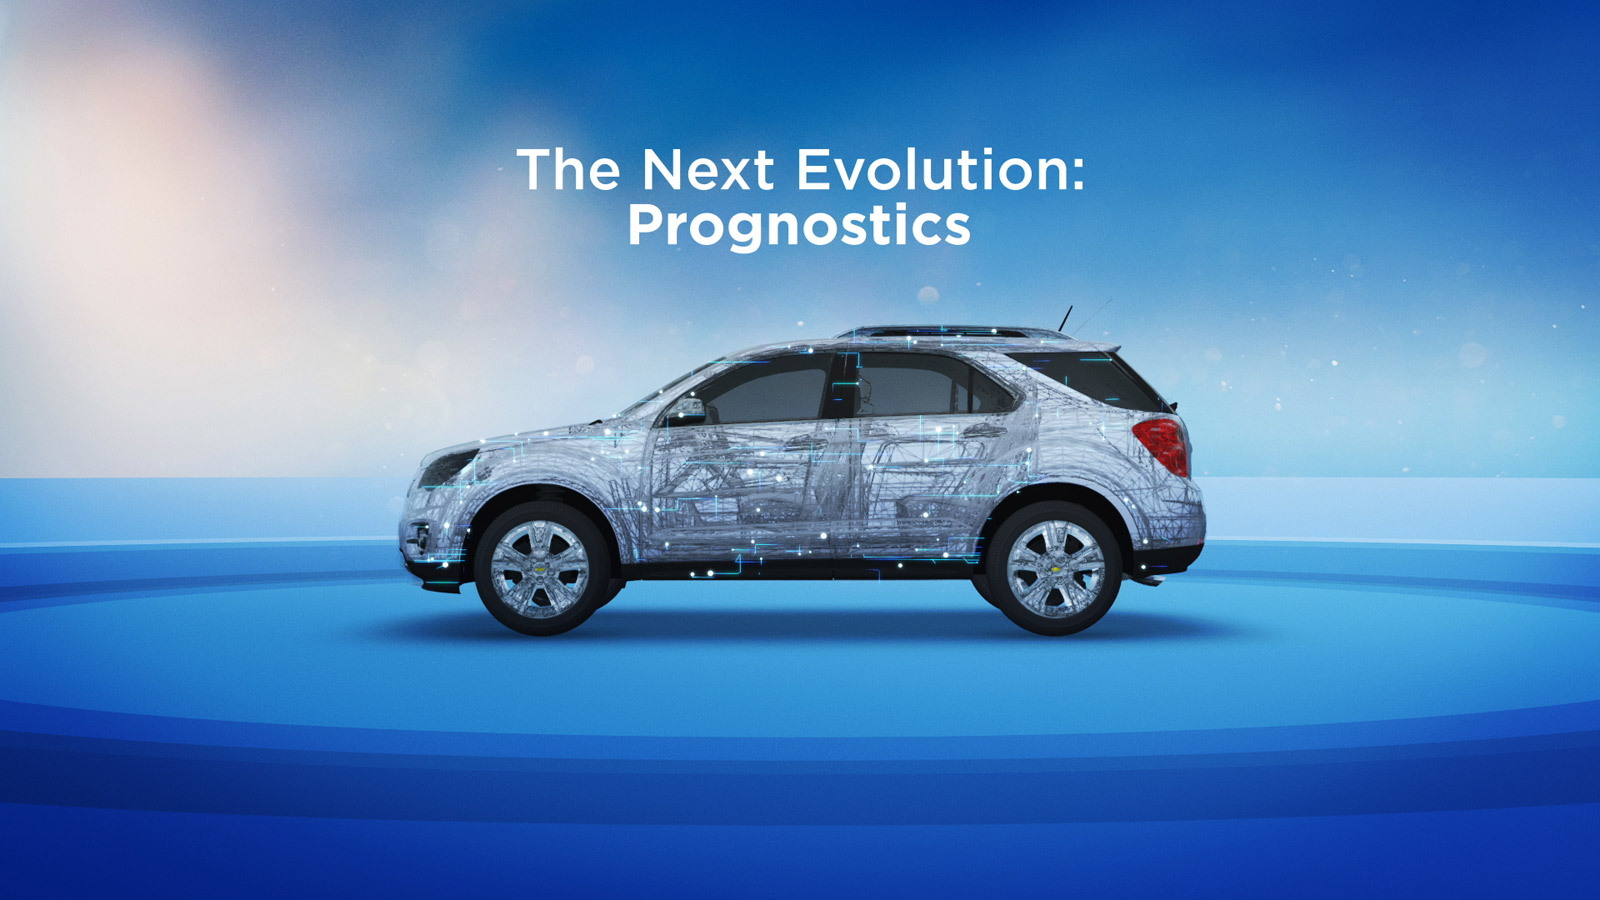 Chevrolet's new OnStar services, 2015 Consumer Electronics Show